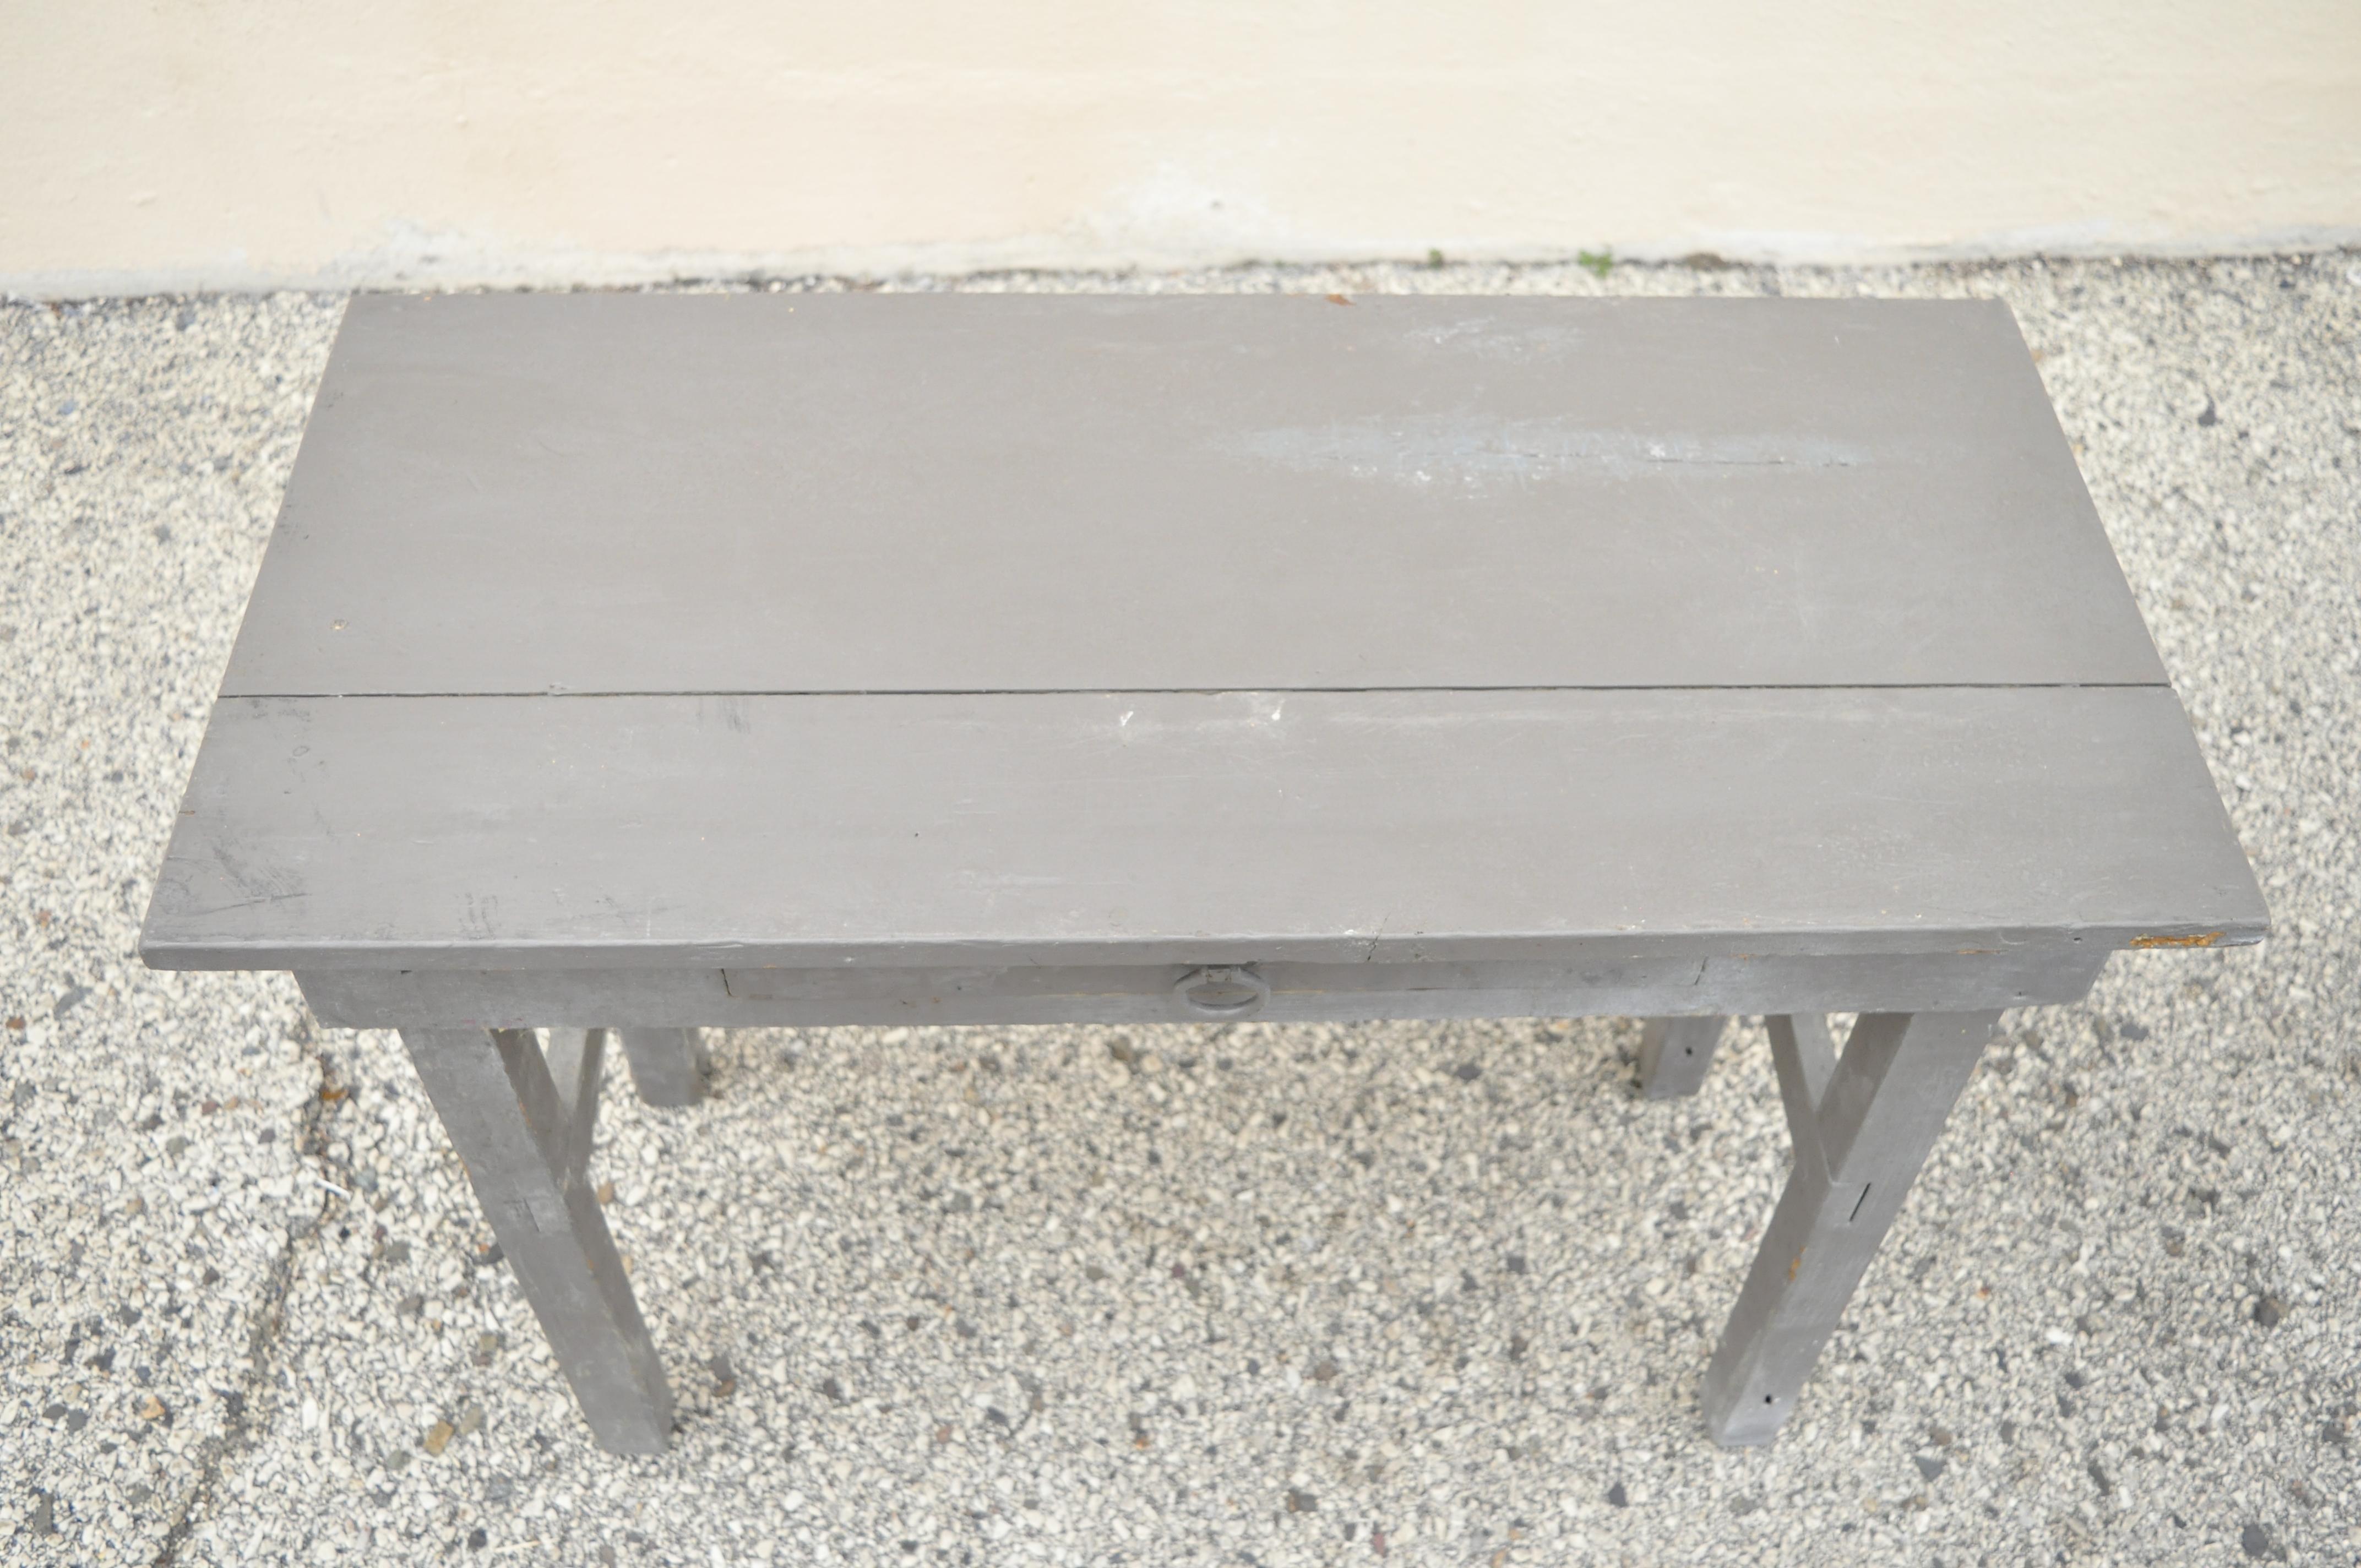 Primitive Antique American Gray Distress Painted 1 Drawer Small Work Table Desk